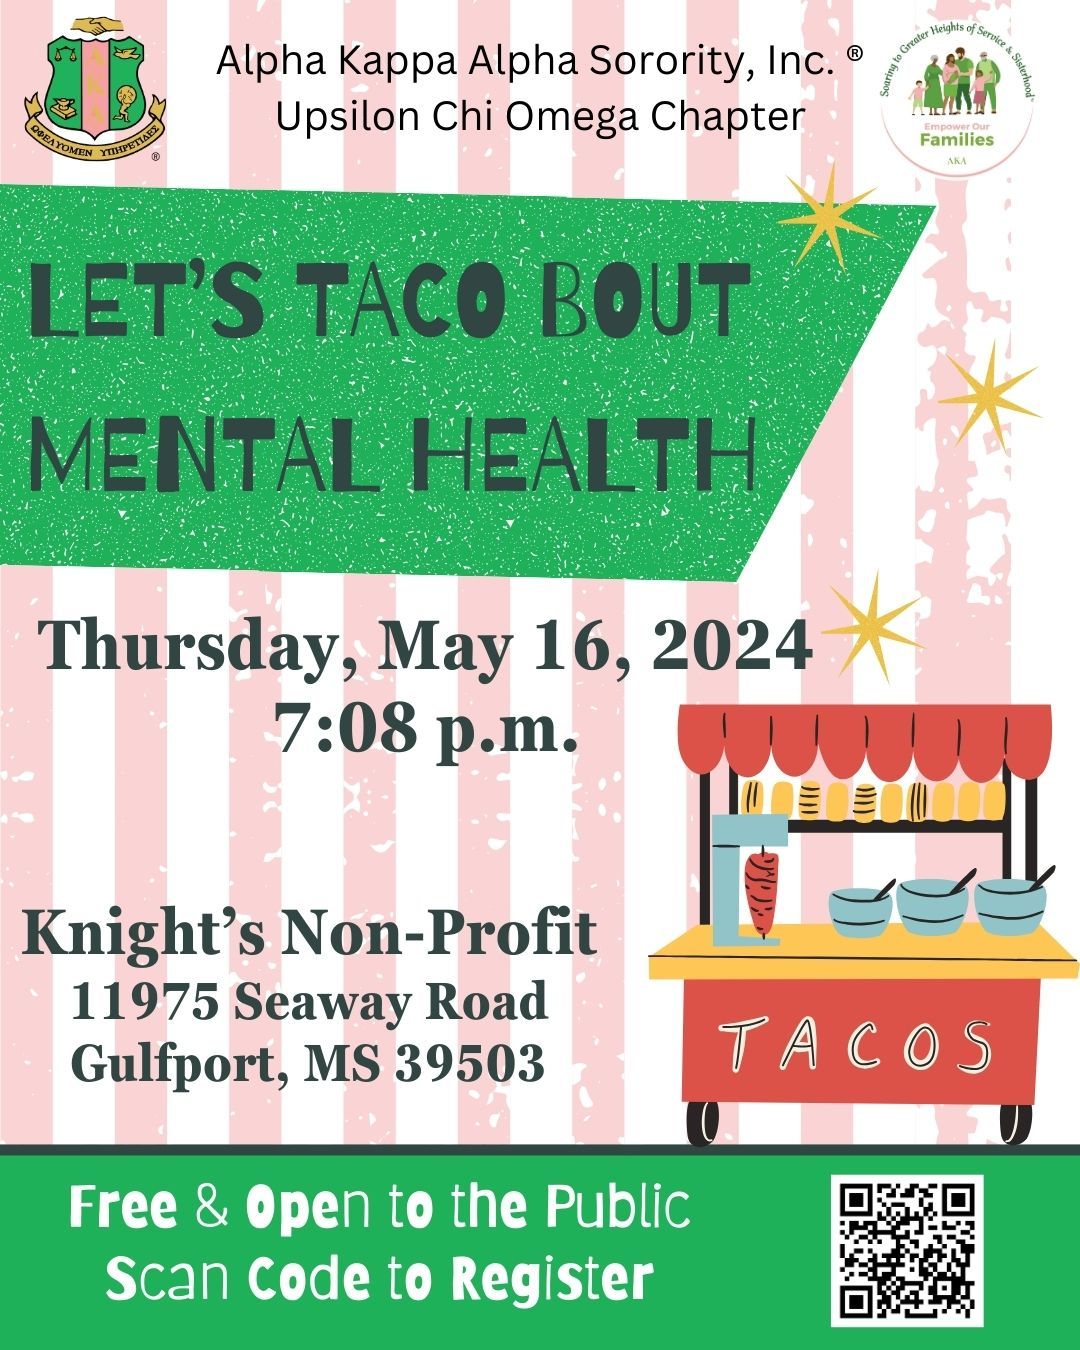 Let's "TACO 'Bout" Mental Health!